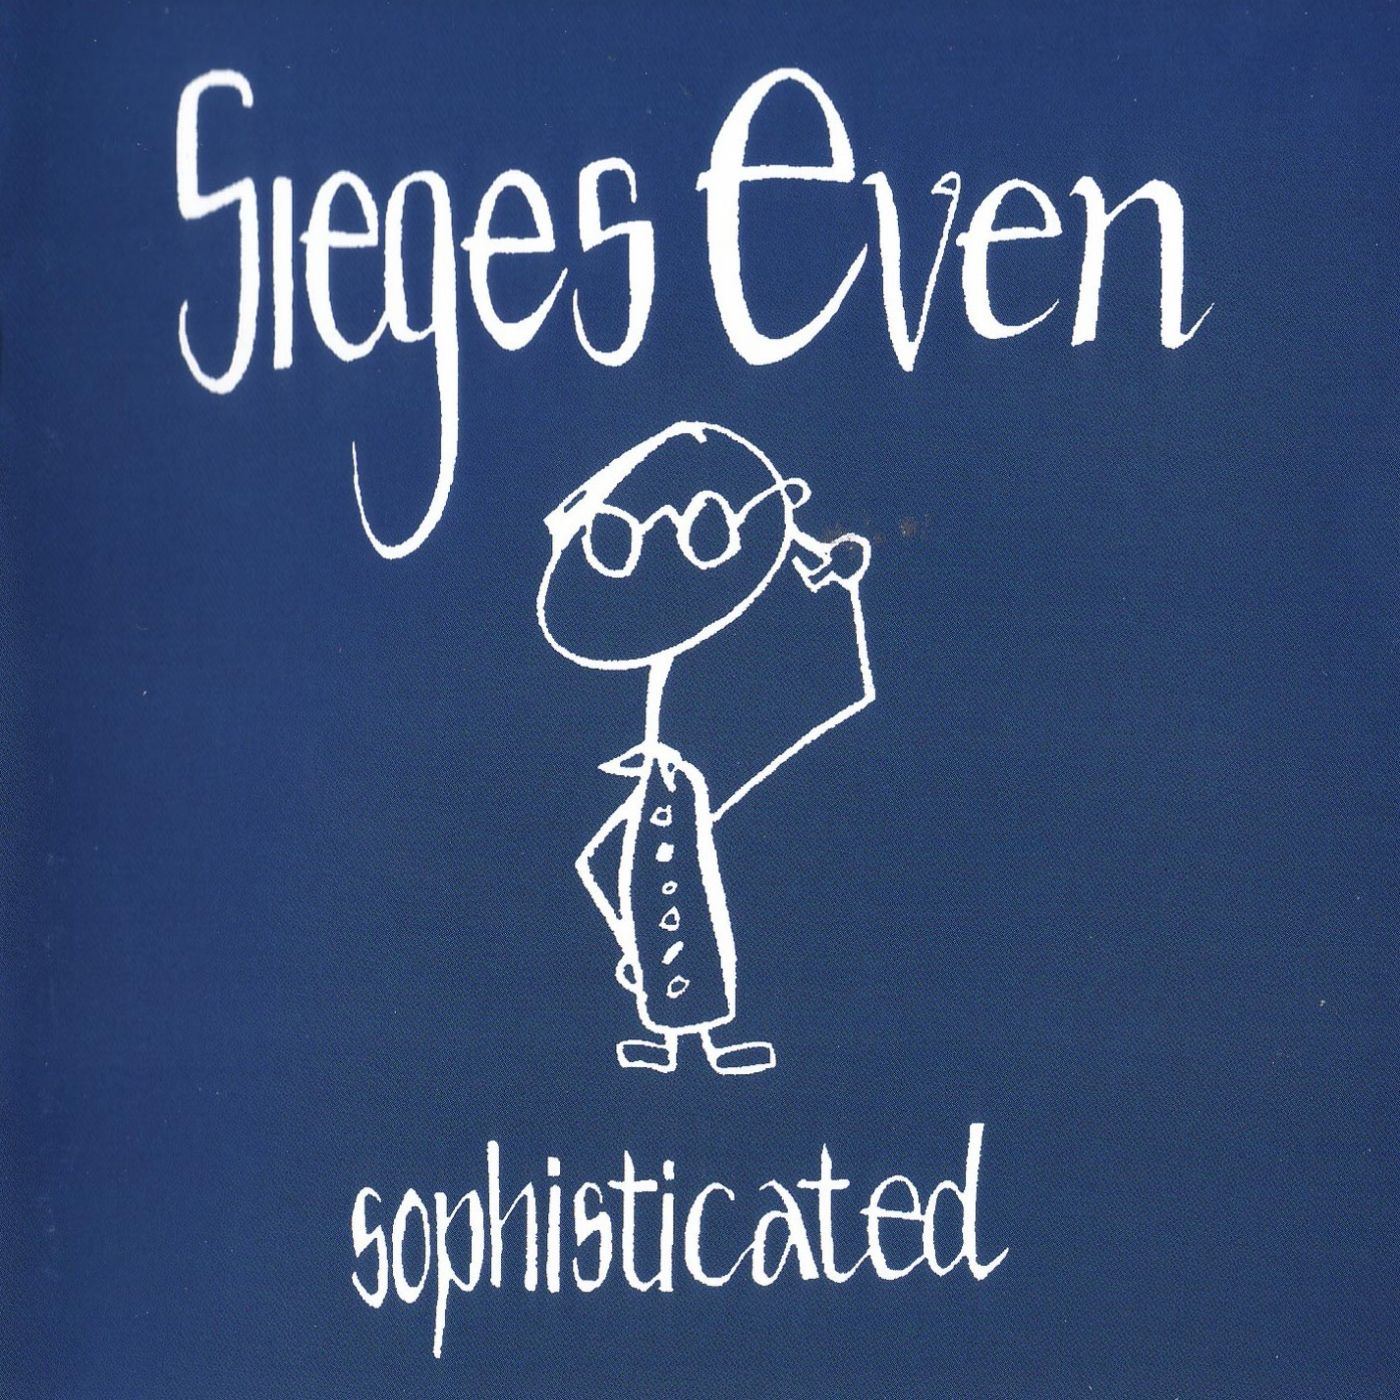 Sieges Even - Sophisticated